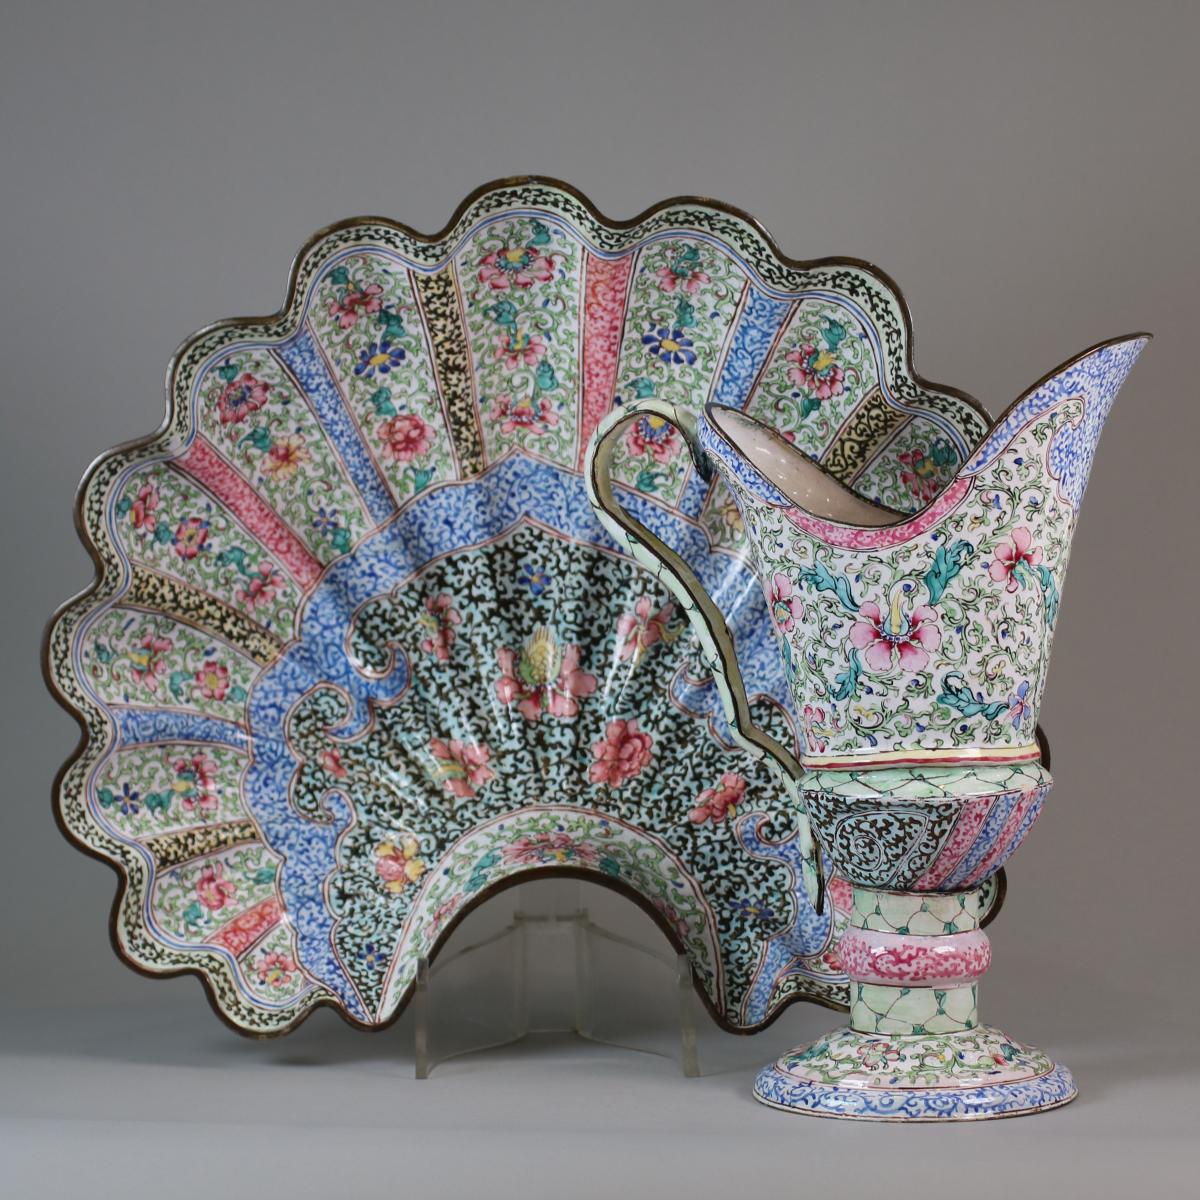 Chinese Canton enamel shell basin and ewer, mid 18th century c